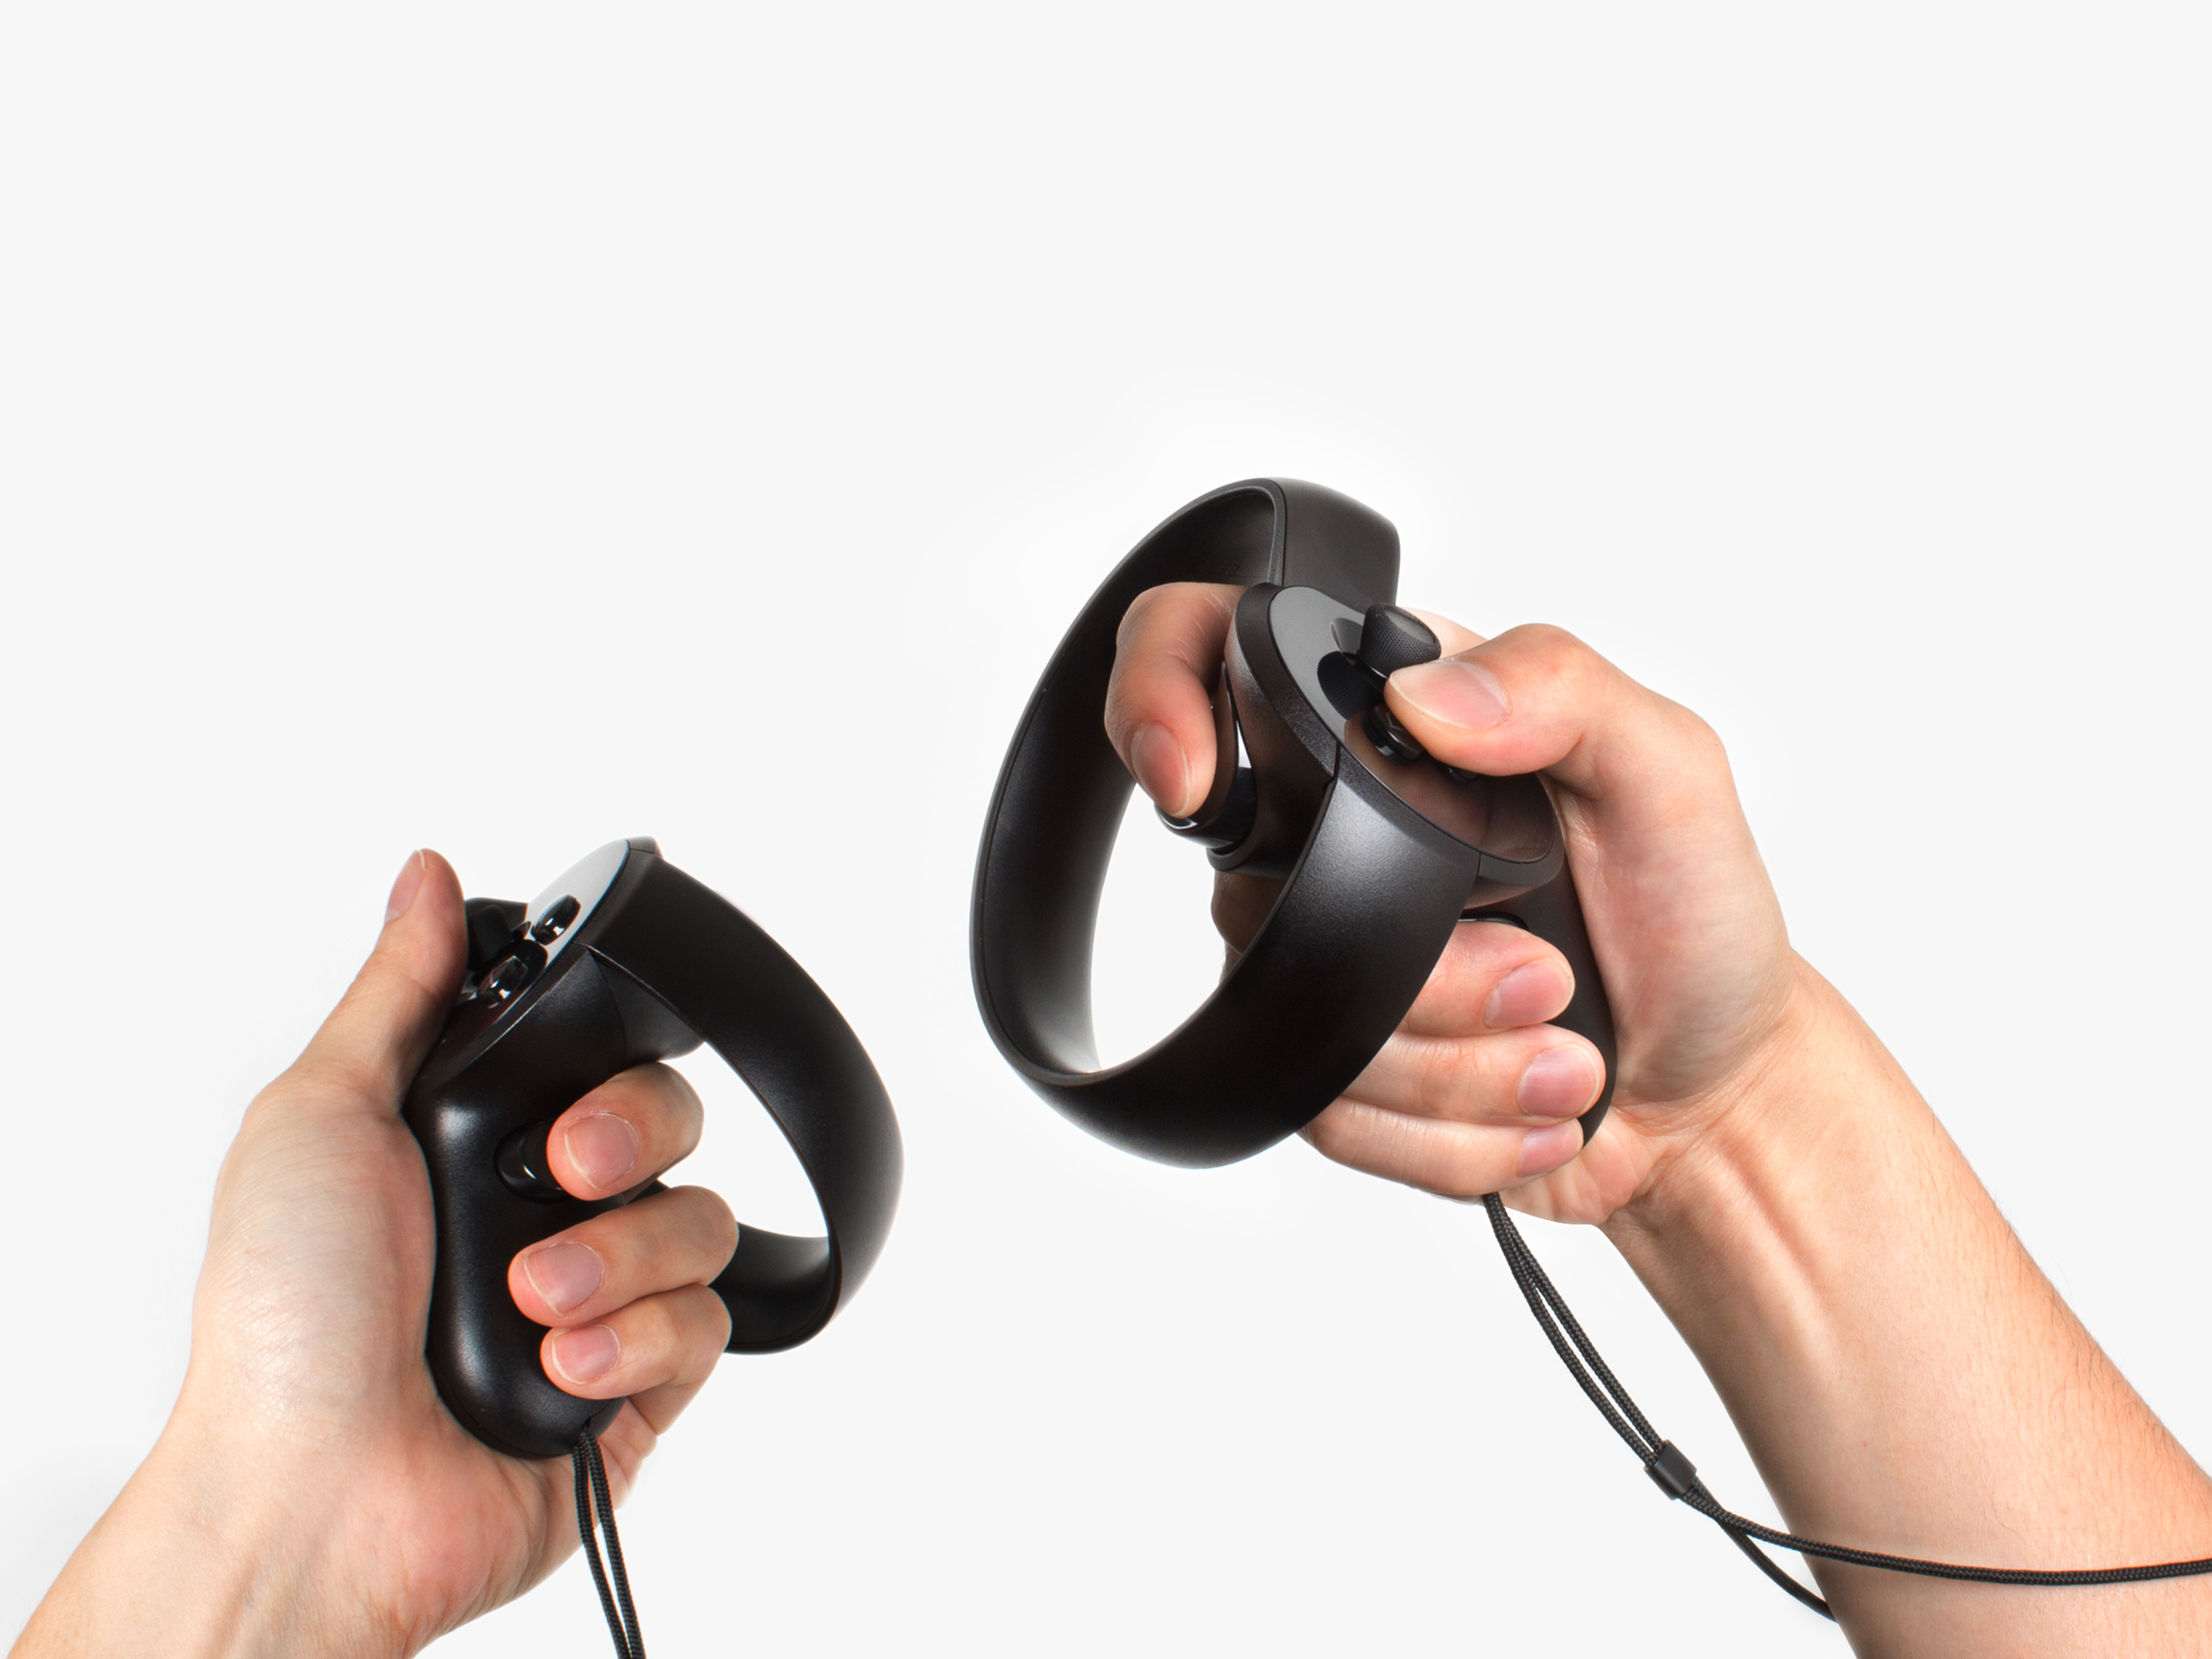 Vr touch